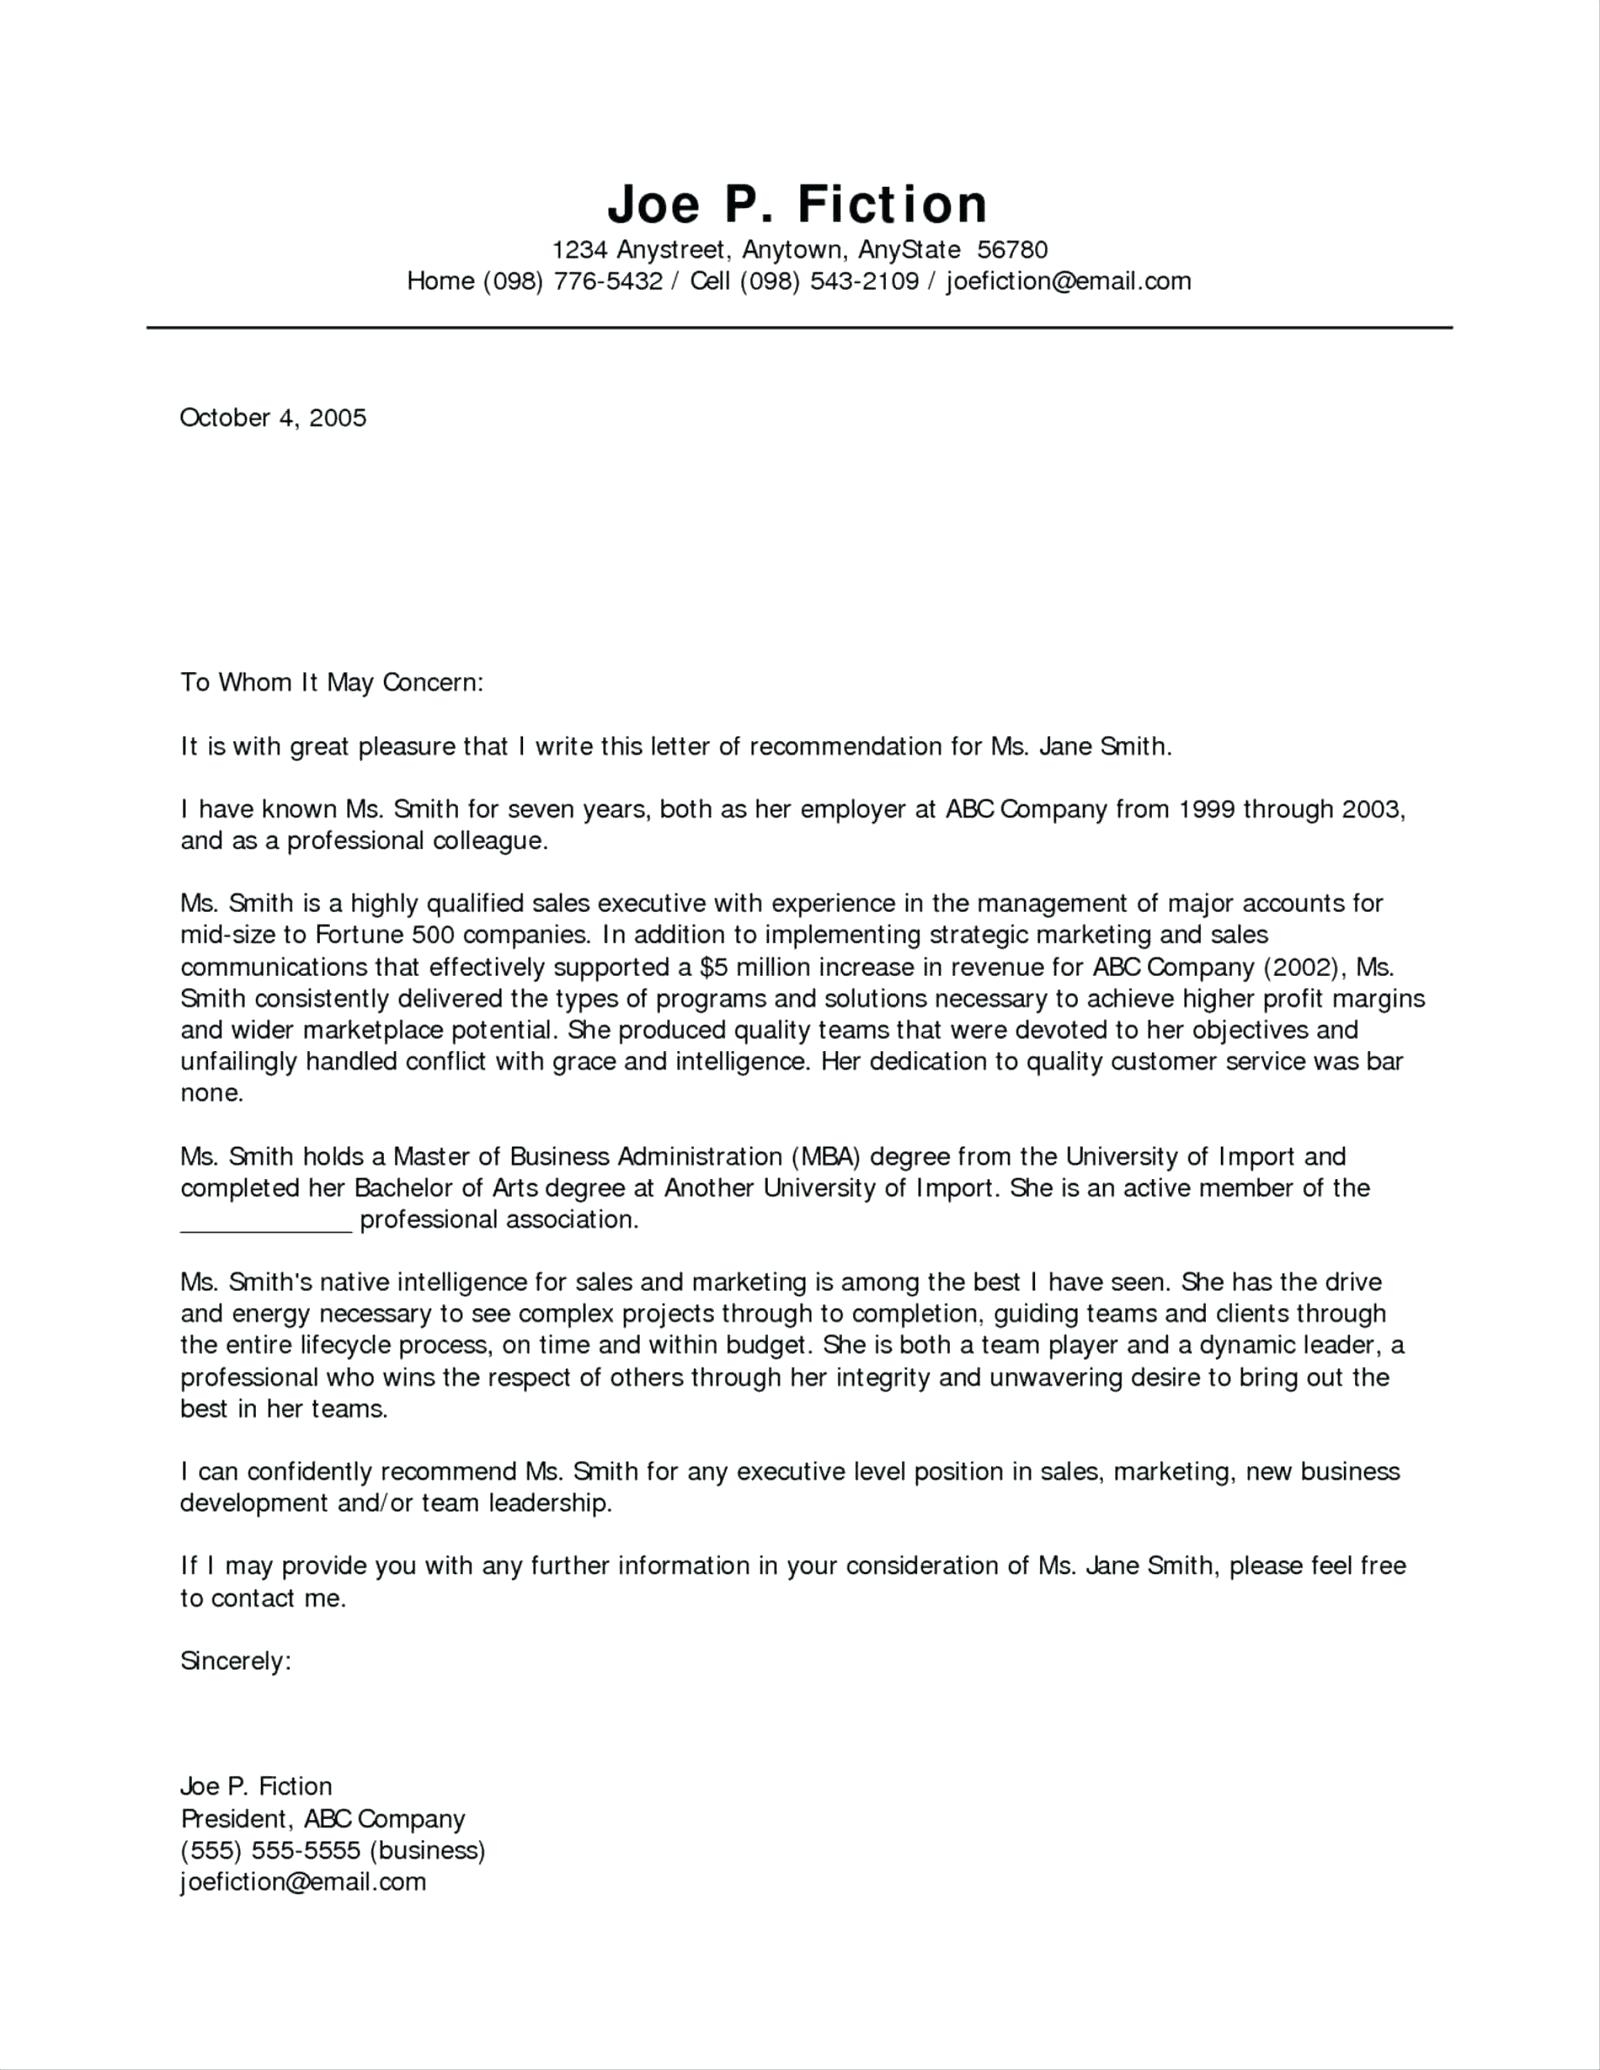 Letter Of Recommendation Template Recommendation Letter For Employee Sample Employment Template A